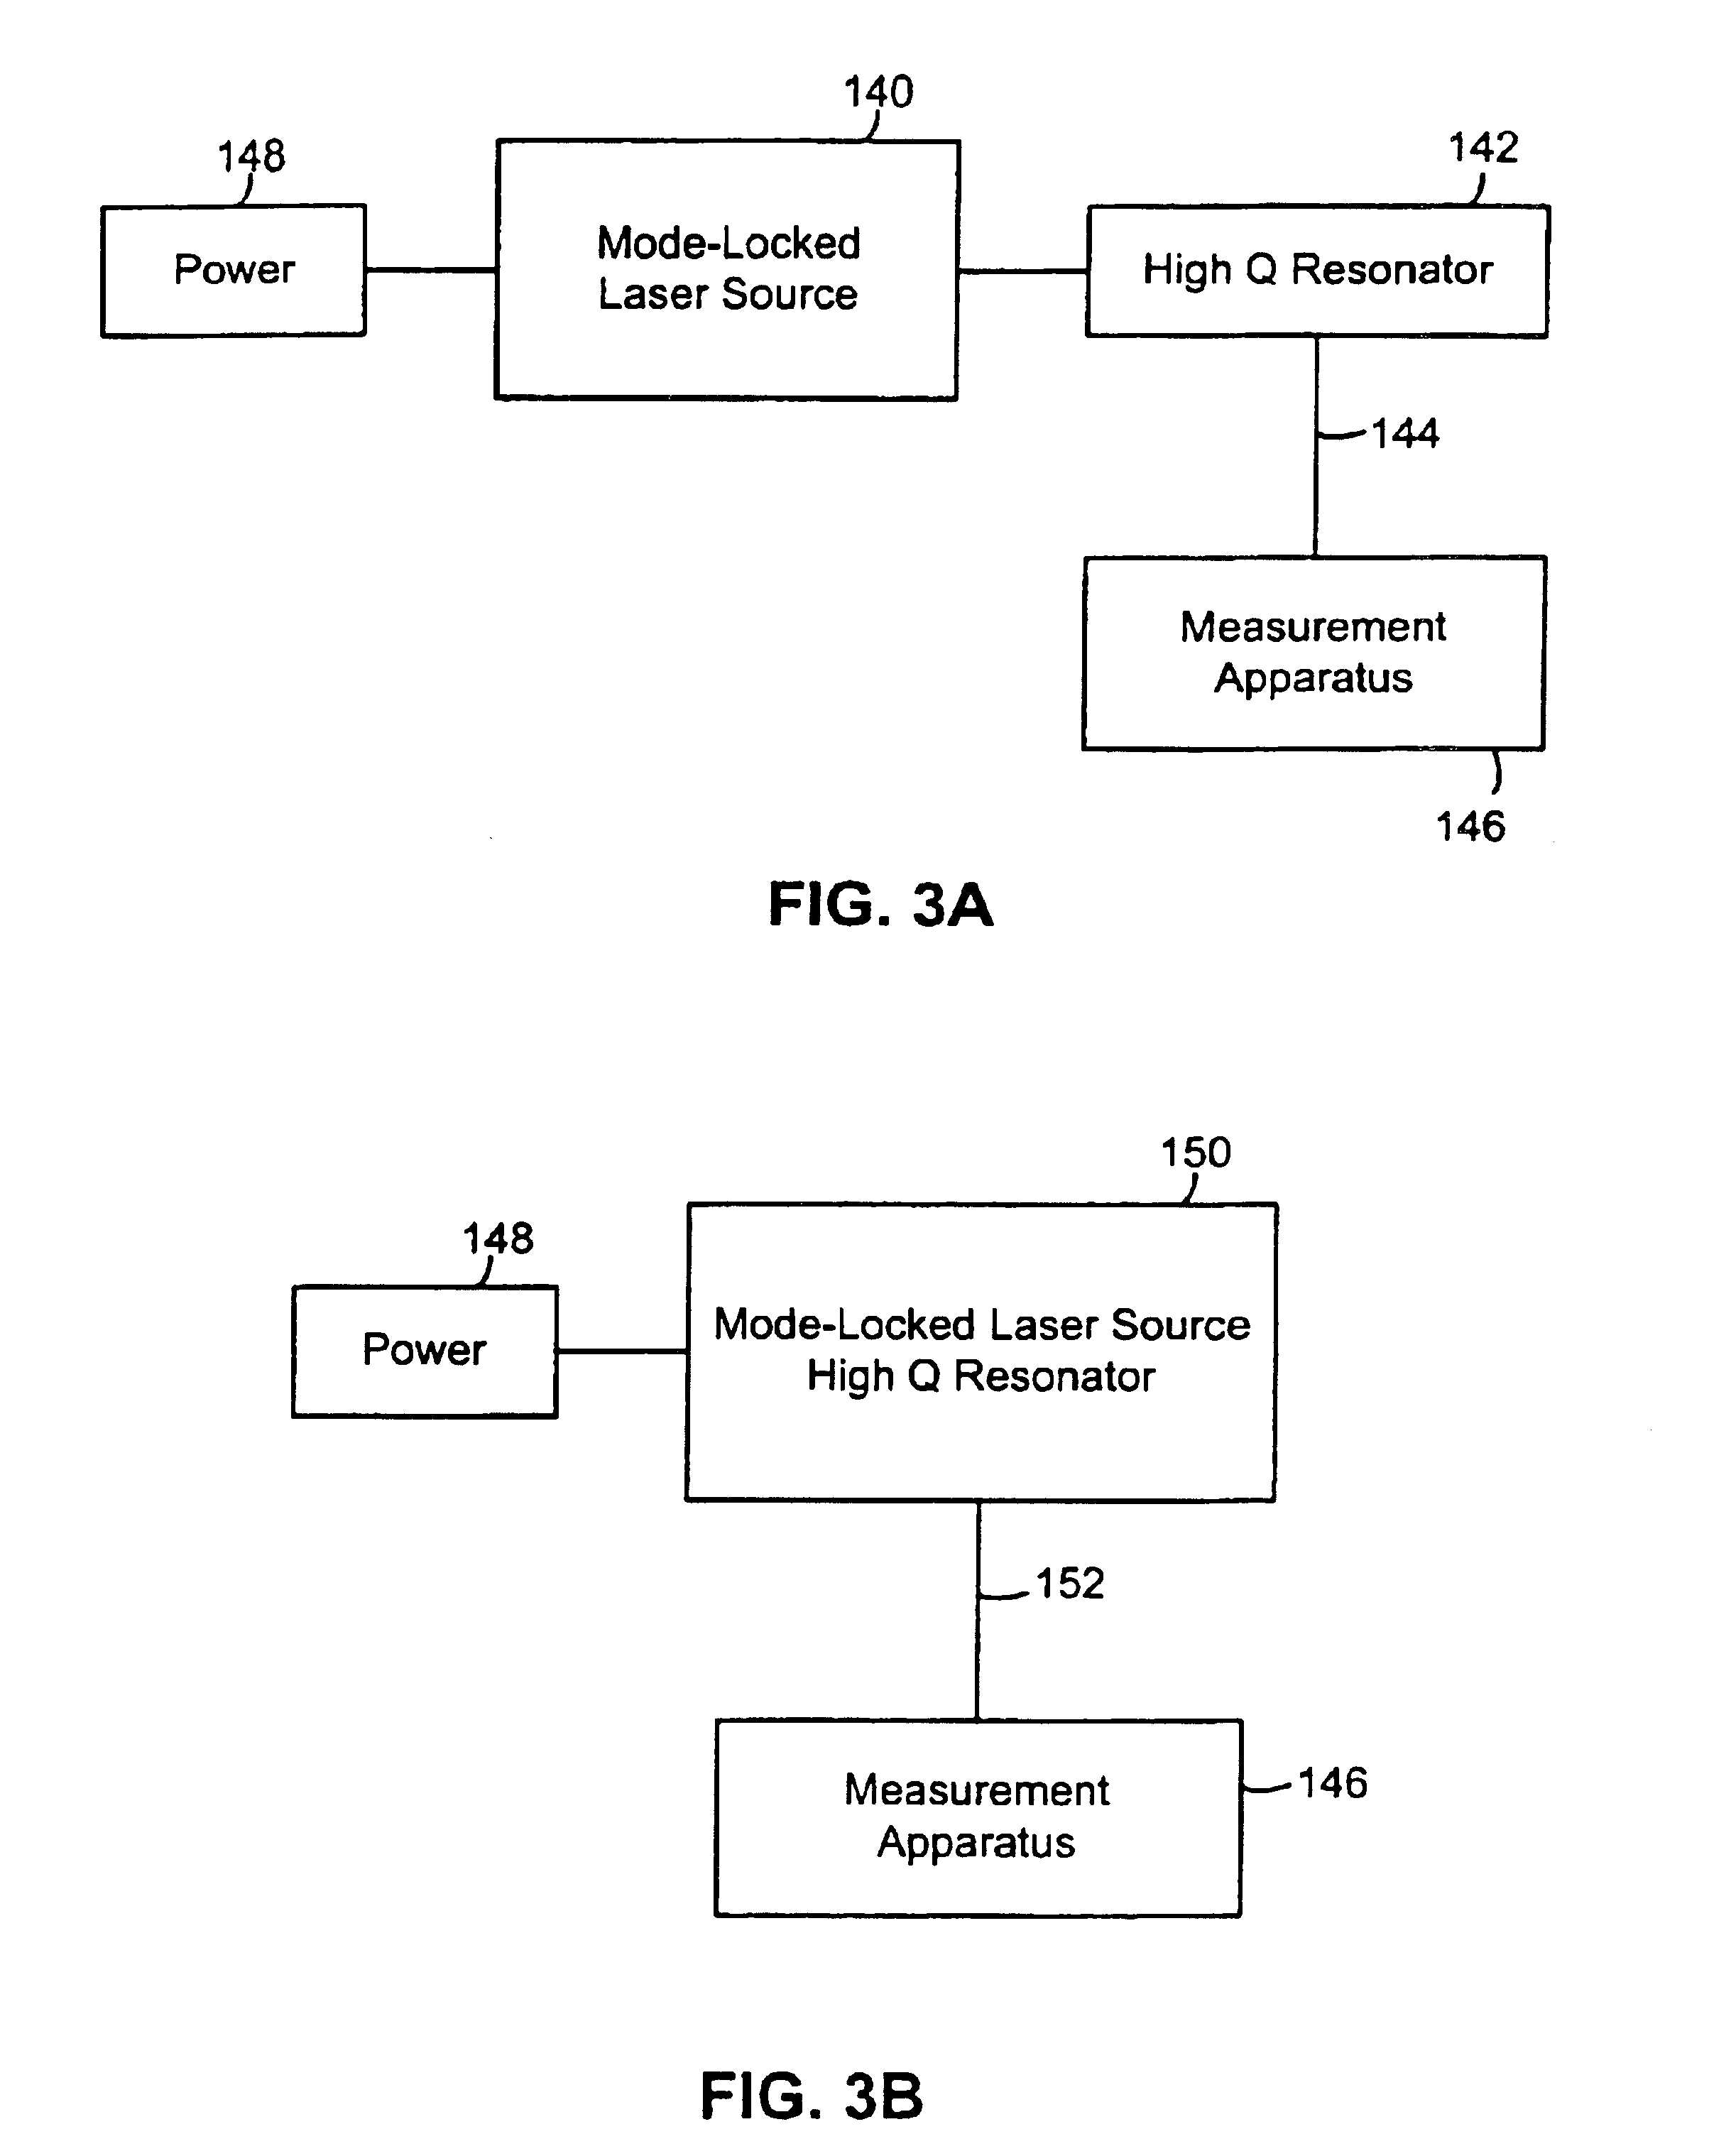 Optical sensor for measuring physical and material properties